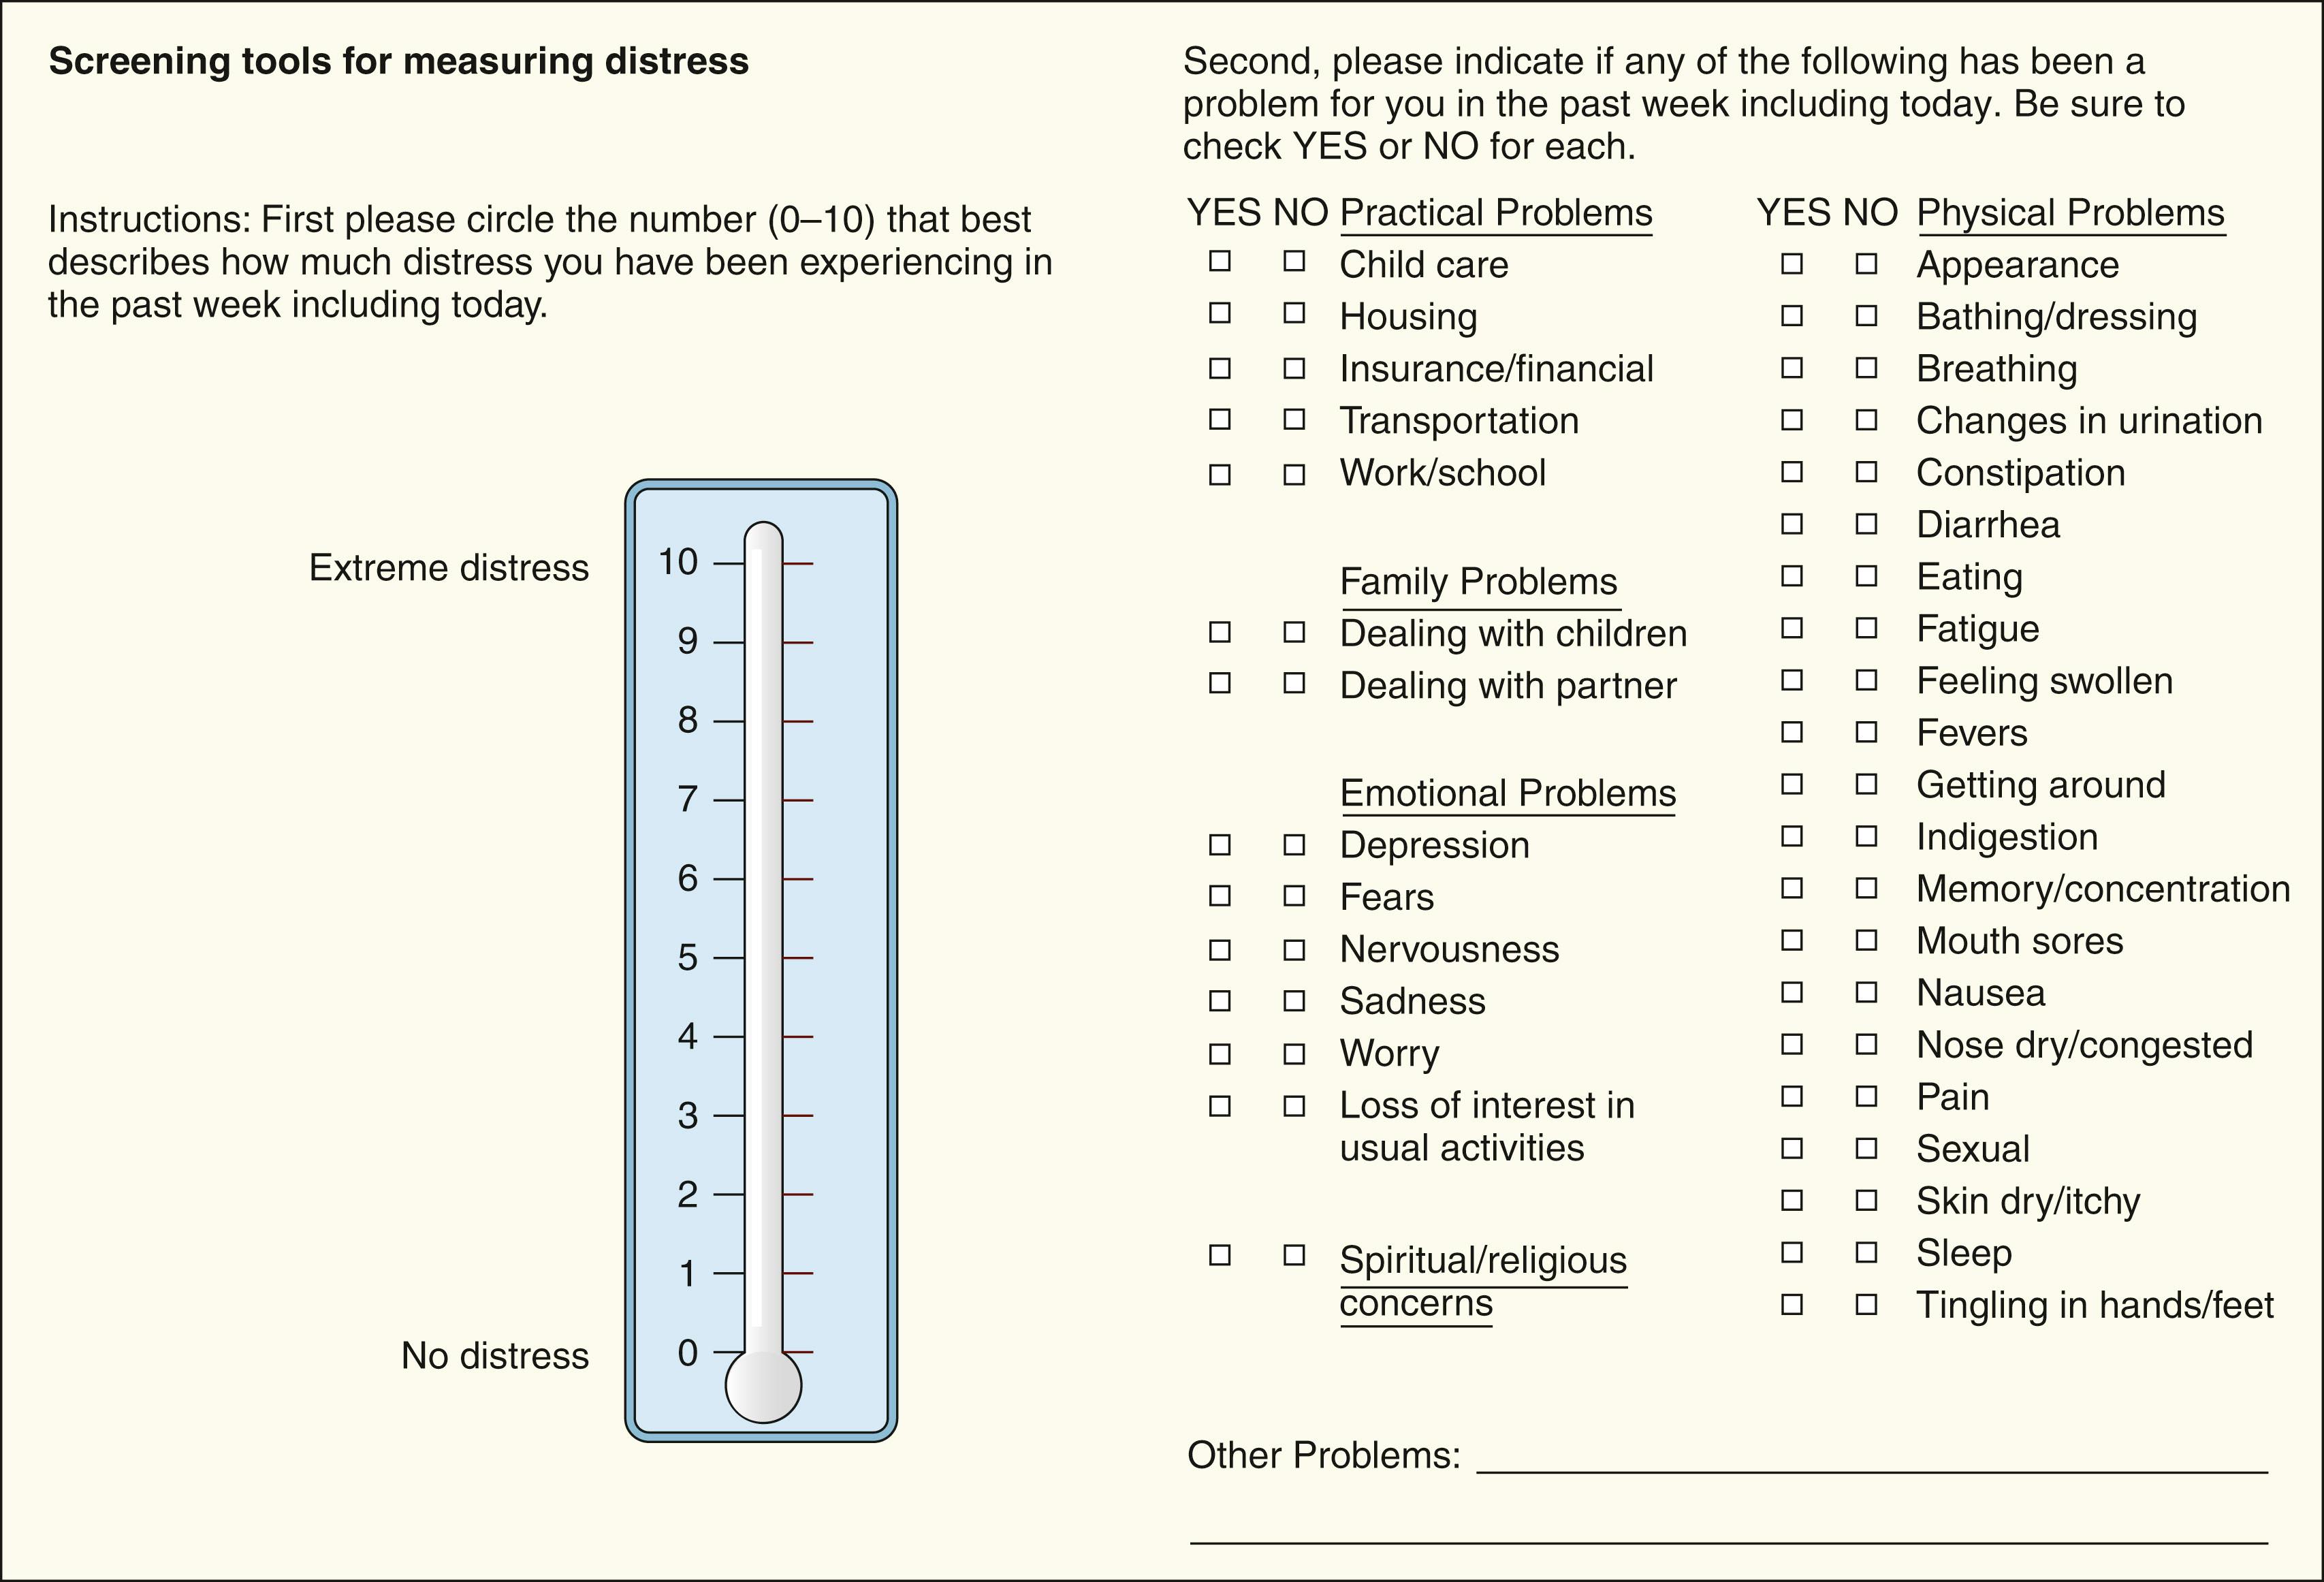 Fig. 79.1, Screening Tools for Measuring Distress.